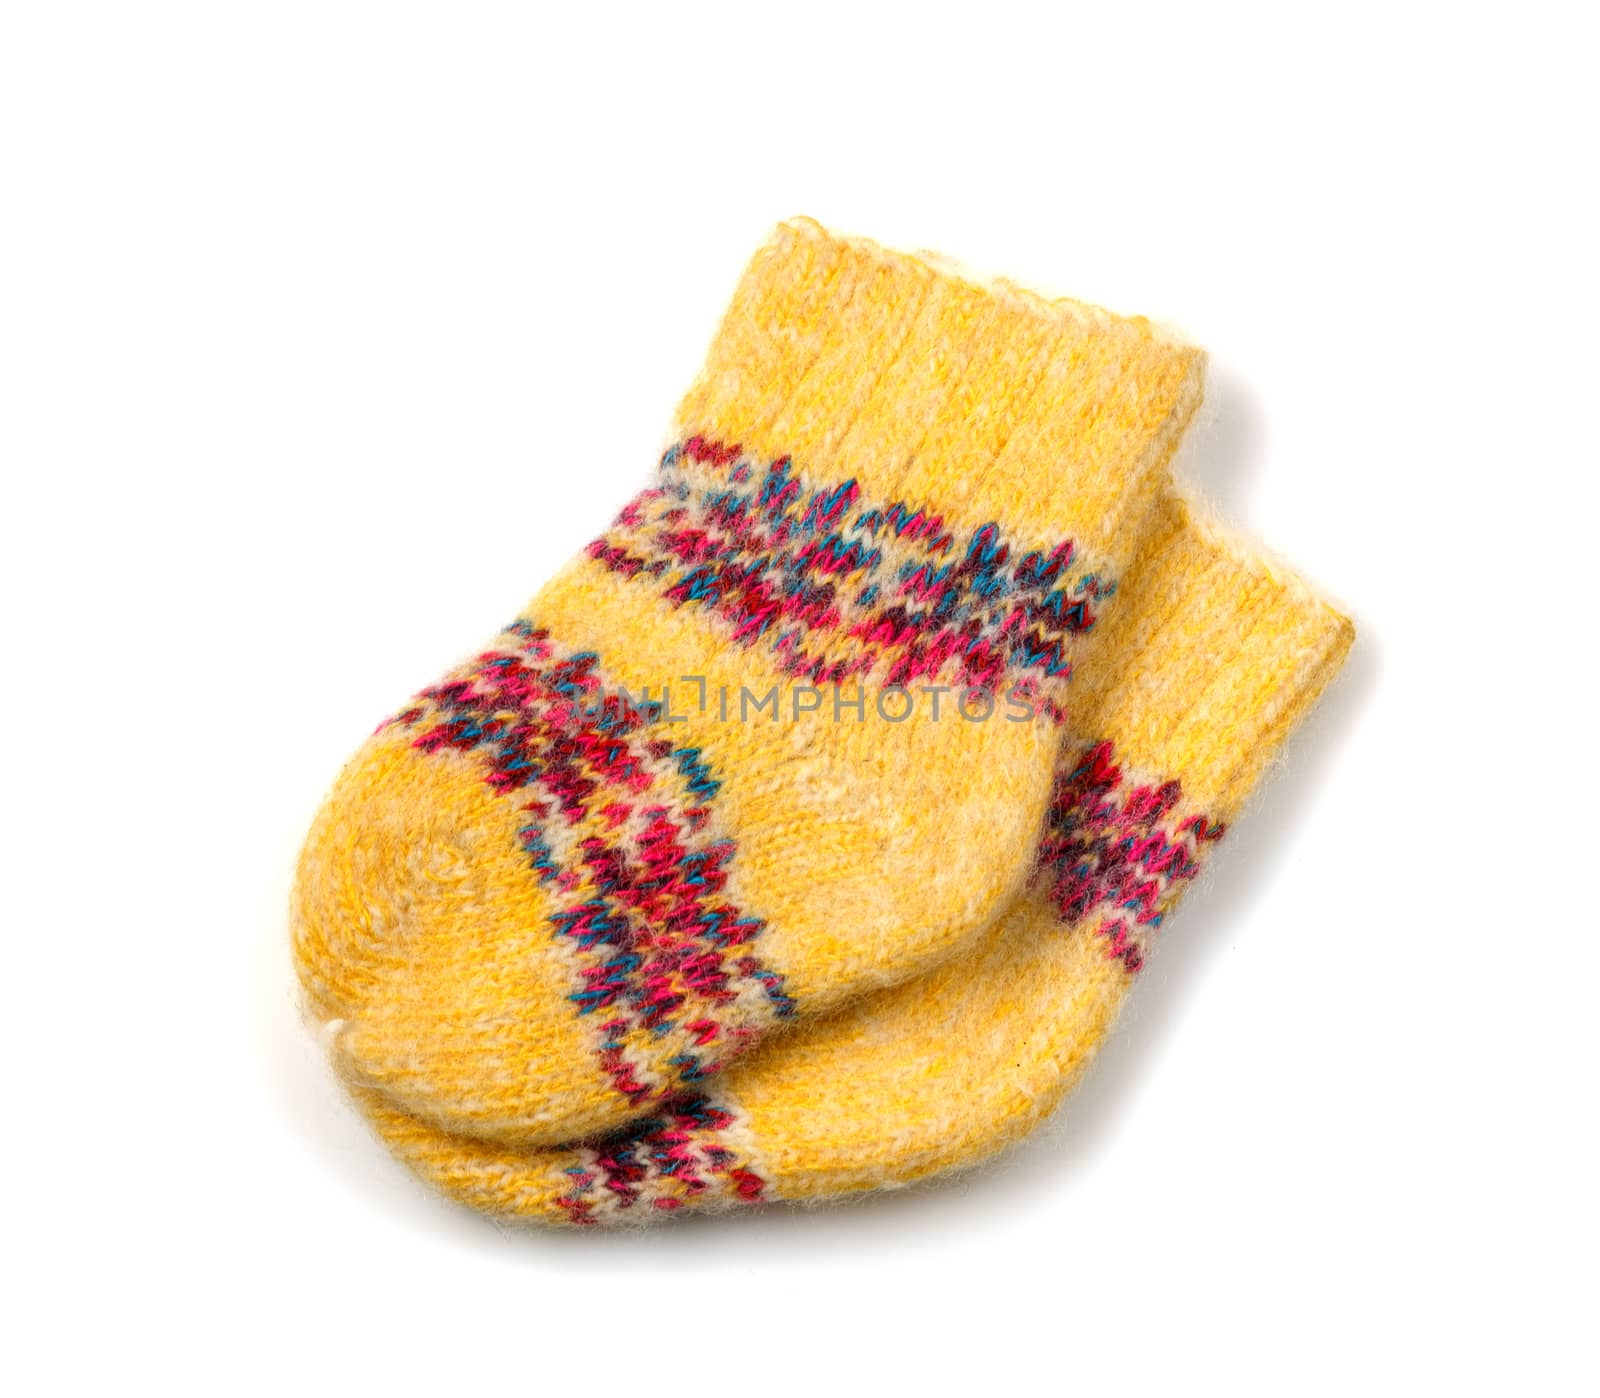 knitted woolen socks on a white background by ires007